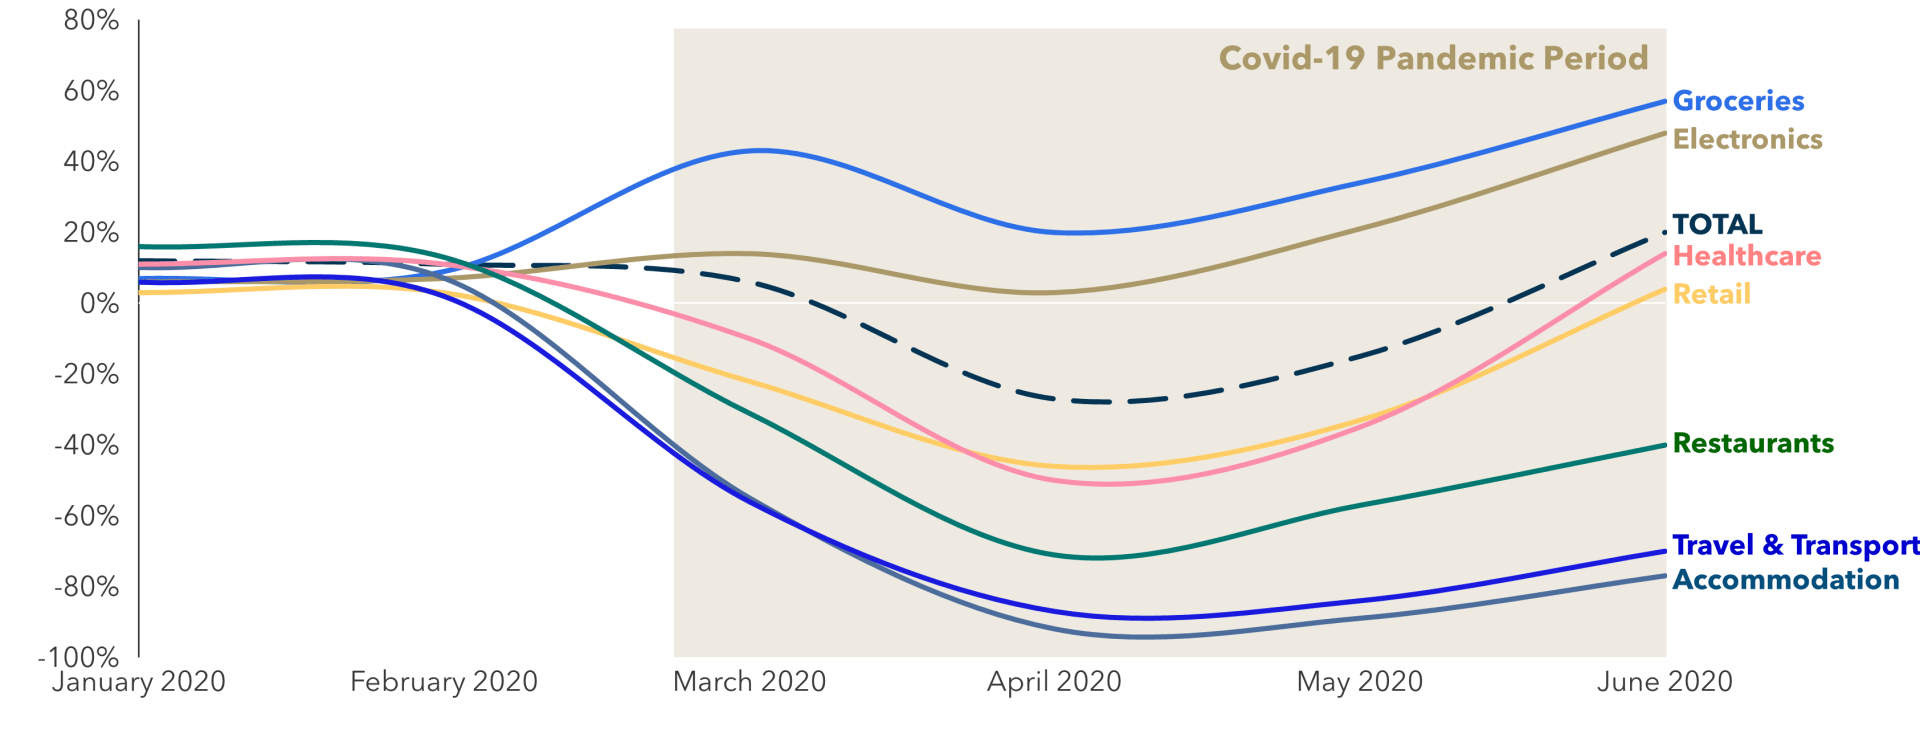 FIGURE 1: YoY % Card Turnover Changes in Selected Sectors (Ireland Example, from January to June 2020)